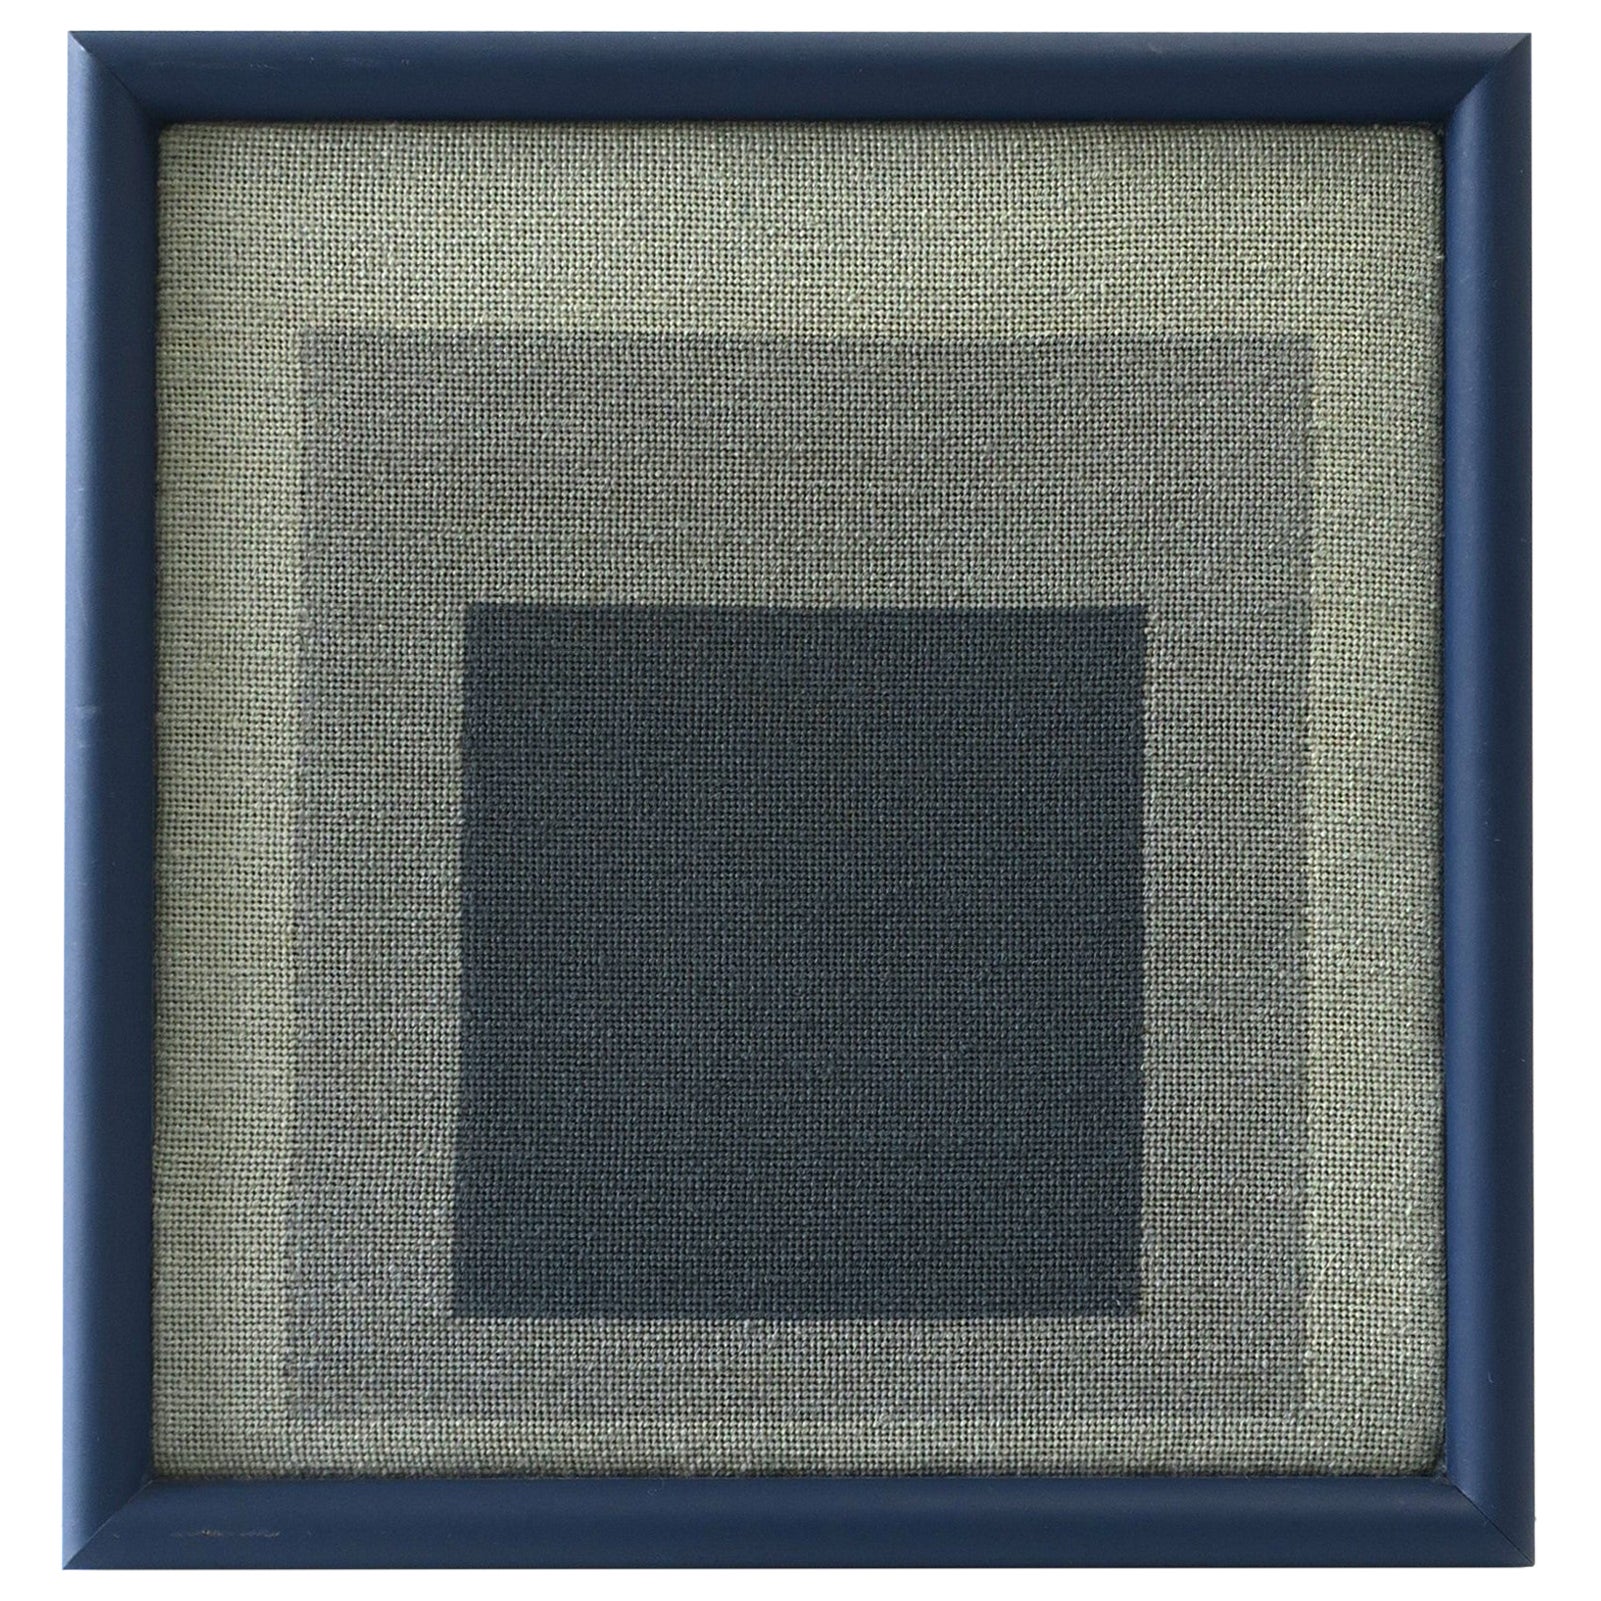 Blue Geometric Needlepoint Artwork Wall Art styled after Josef Albers  For Sale